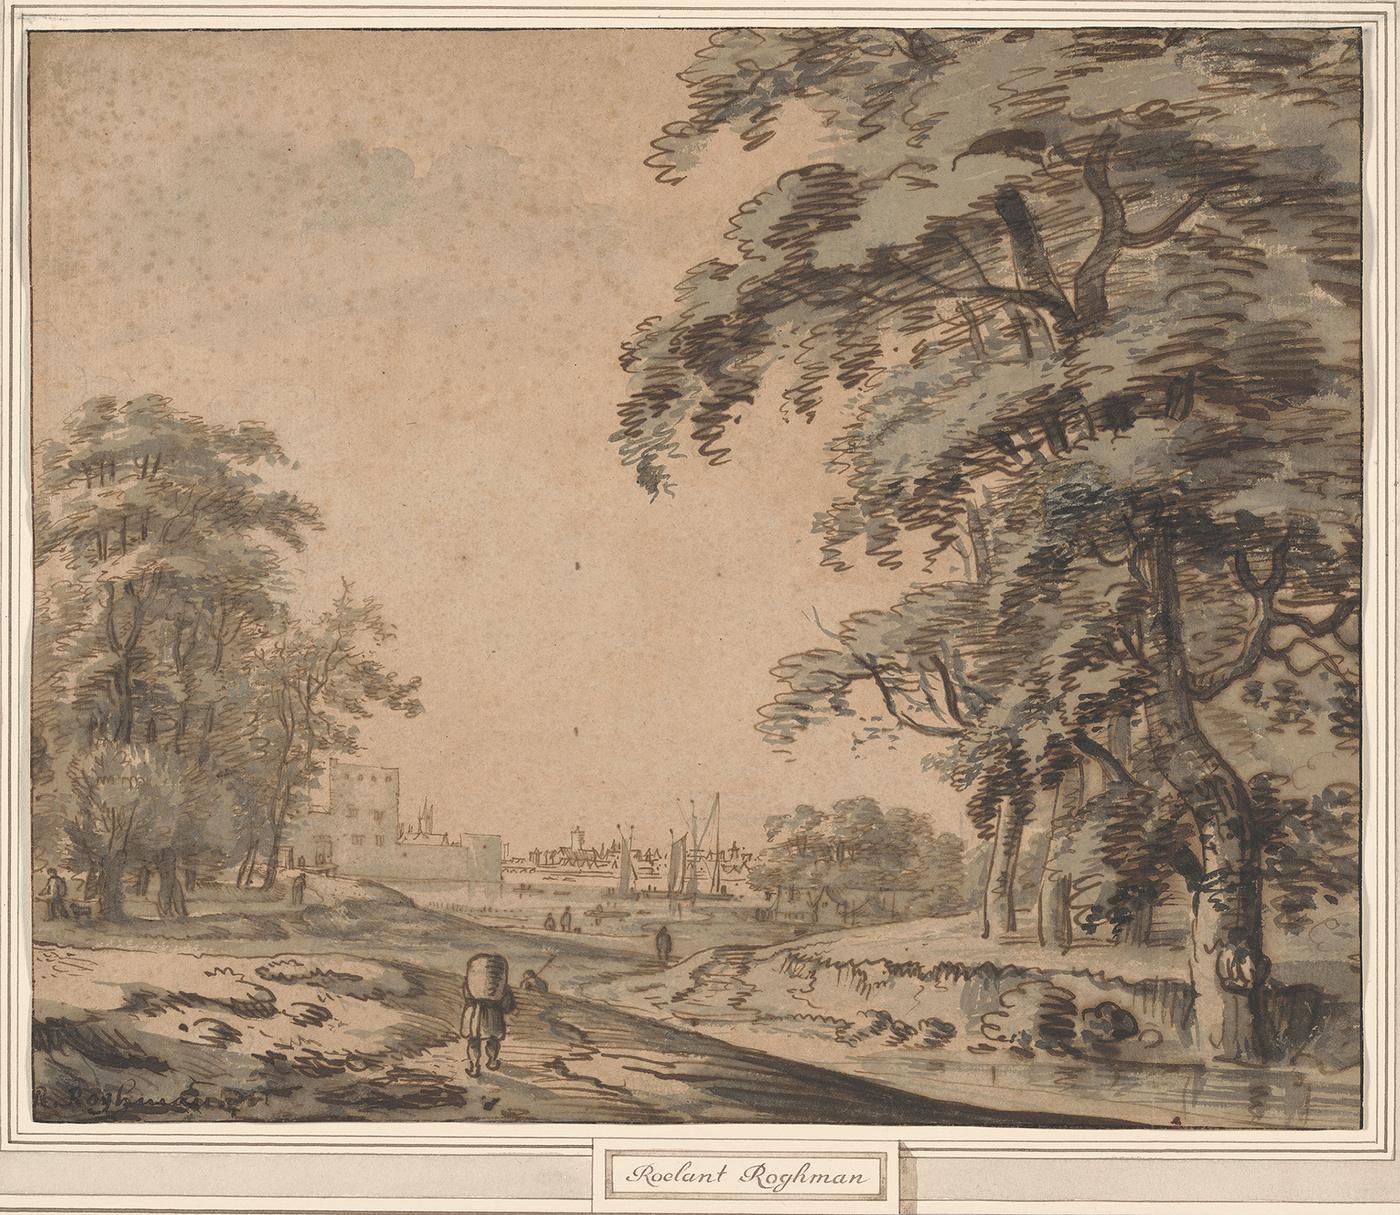 Drawing of High trees by a river with a town in the distance